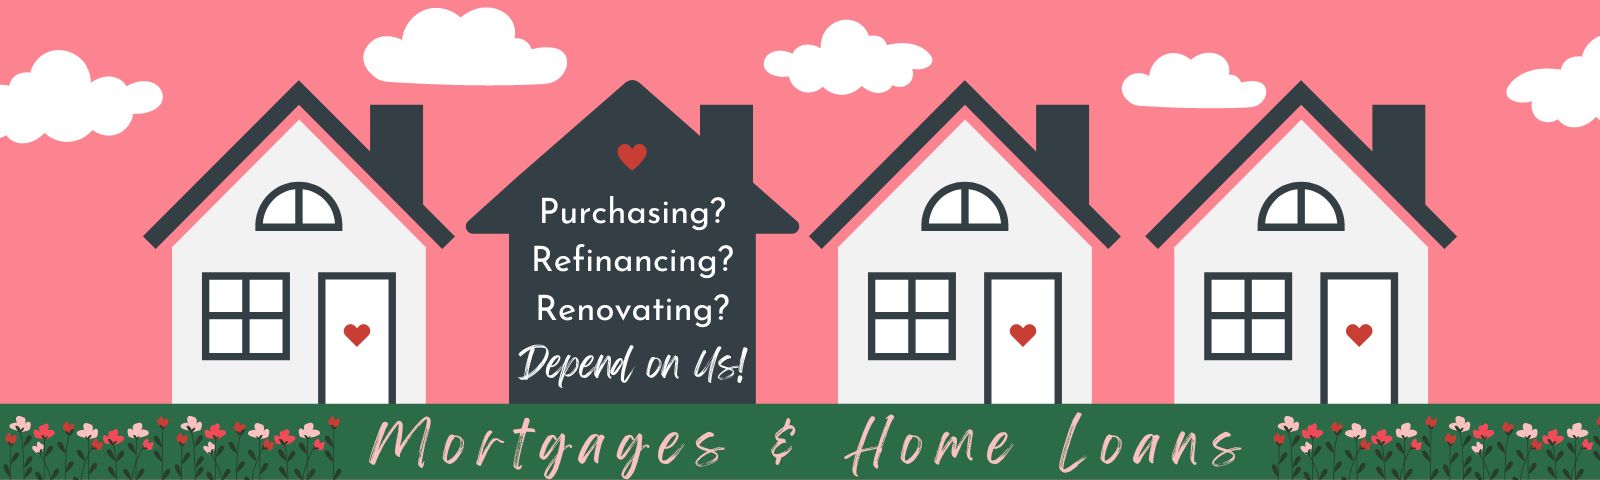 Purchasing? Refinancing? Renovating? Depend on Us! Mortgages and Home Loans.